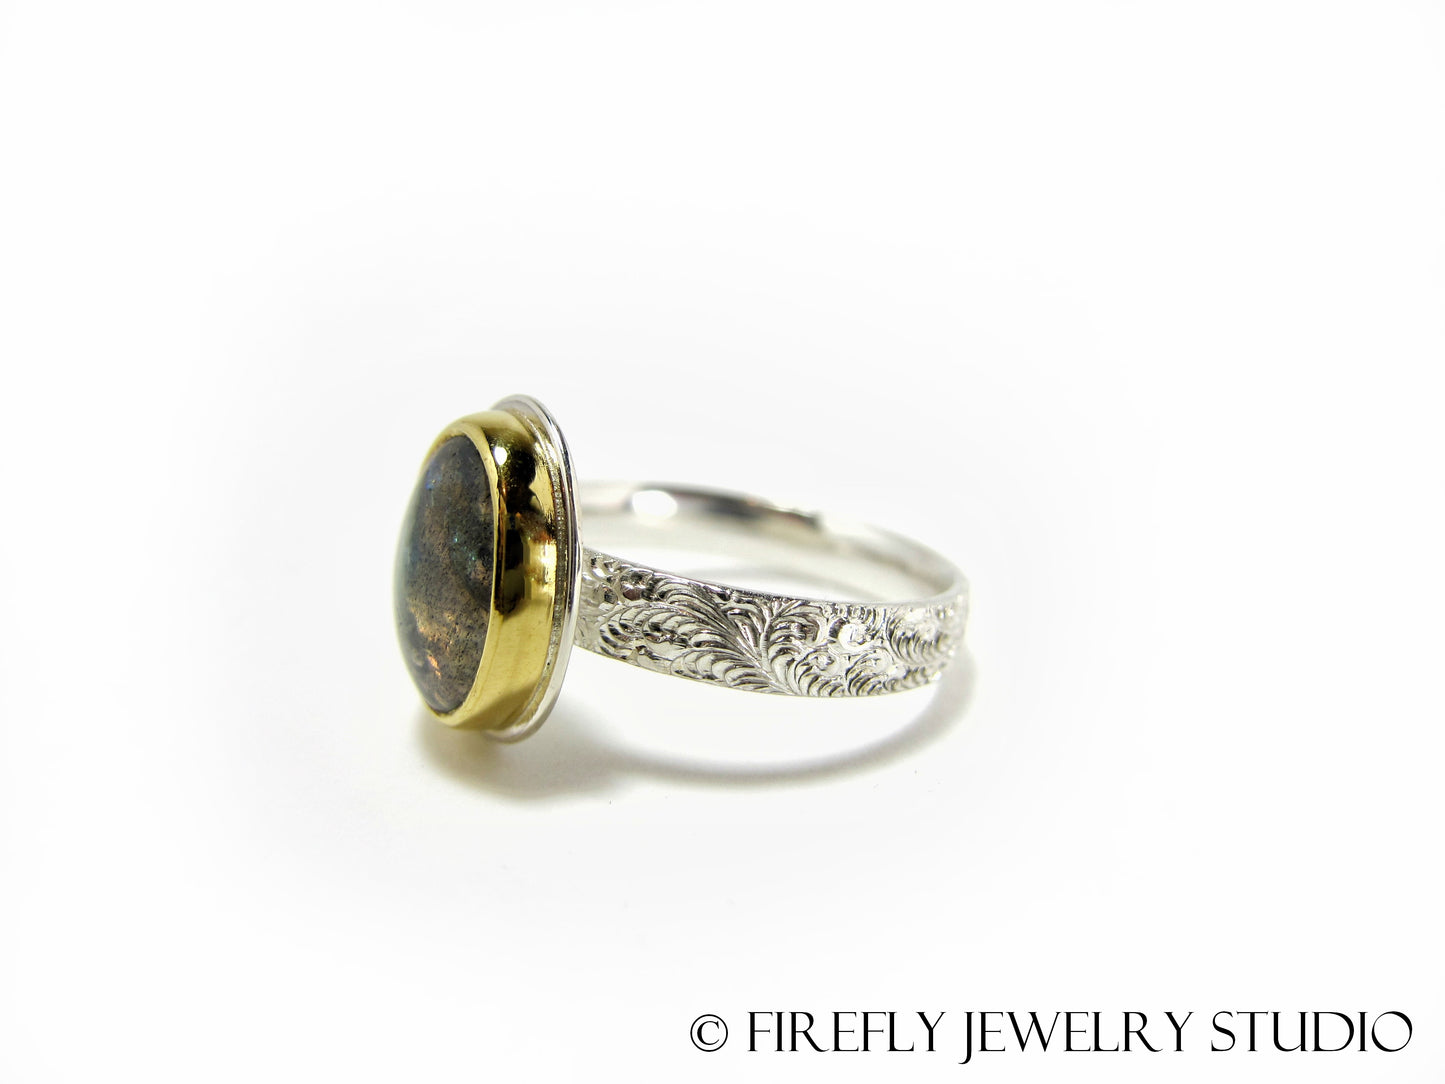 Labradorite Moon Glow Ring in 24k Gold and Sterling. Size 7.75 - Firefly Jewelry Studio